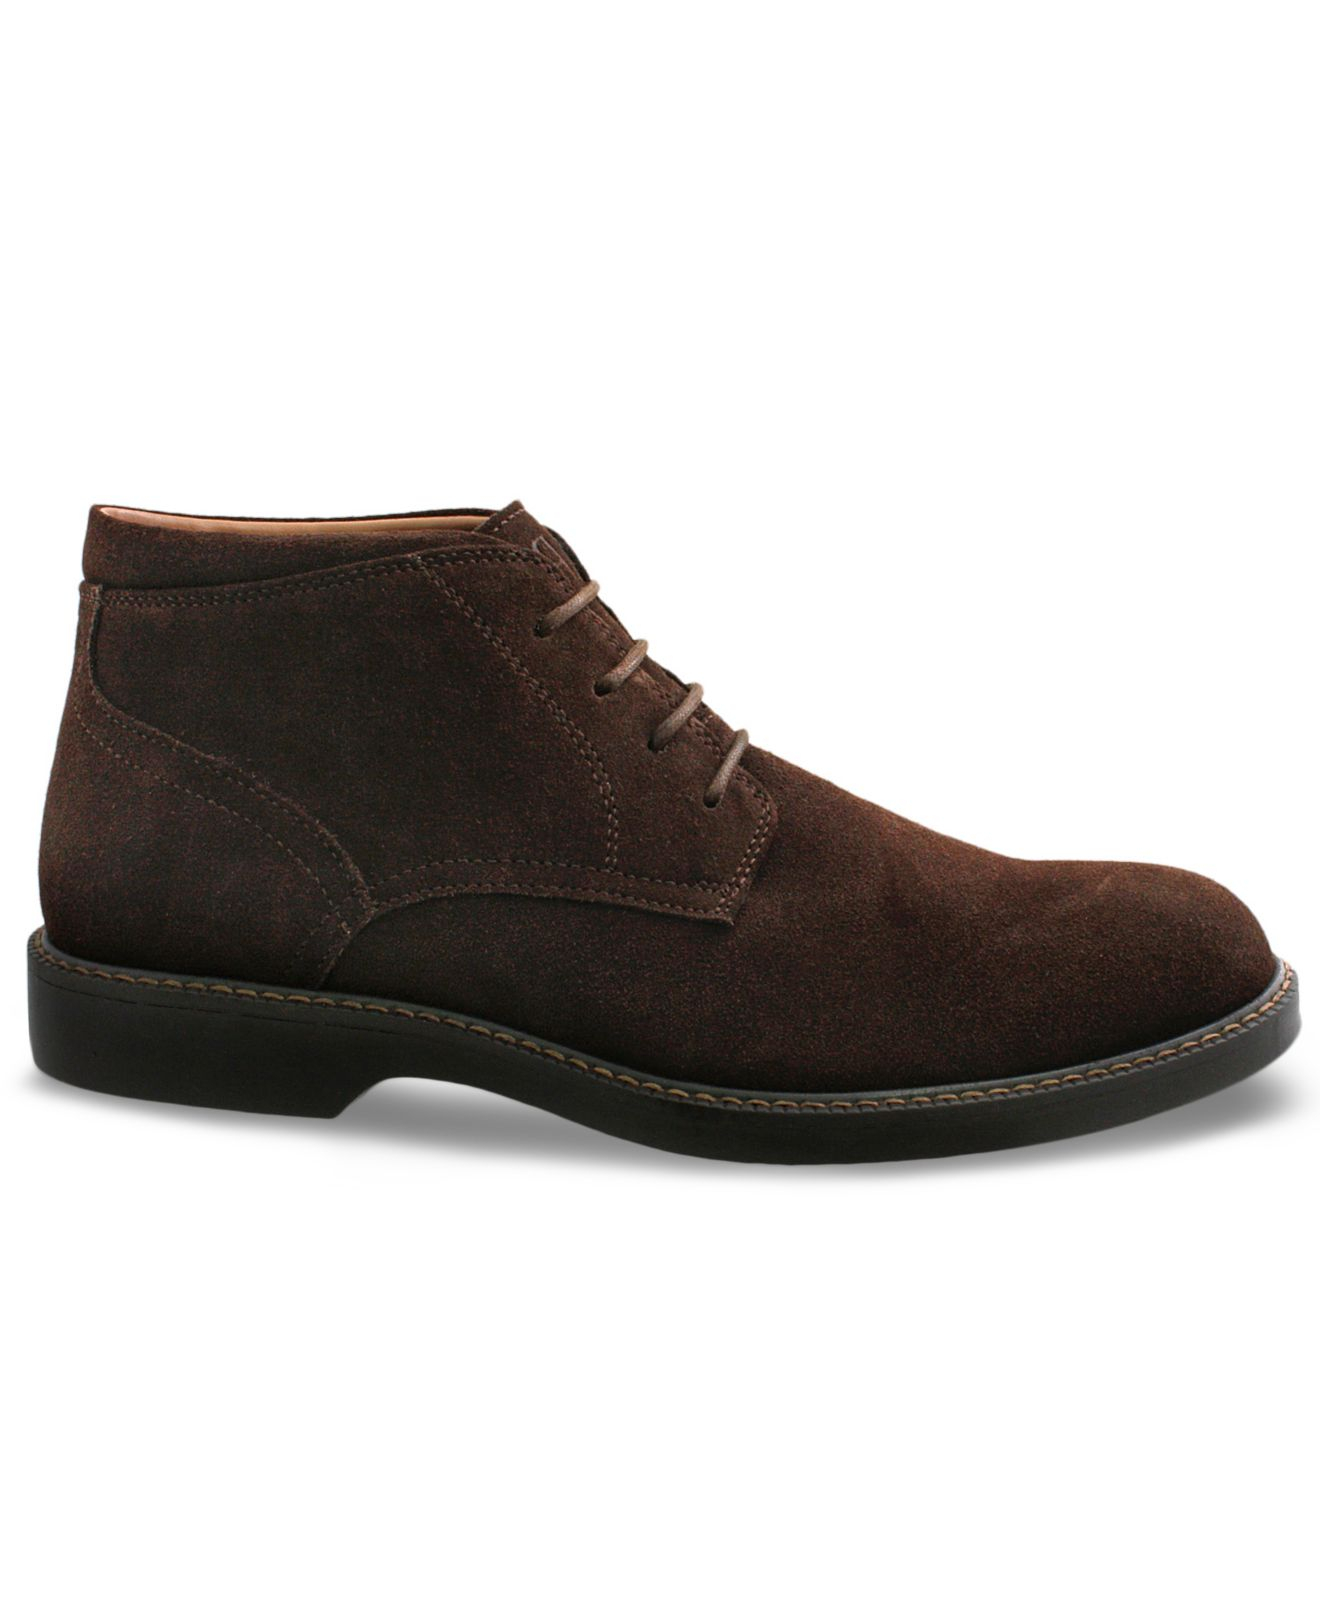 G.h. bass & co. Plano Chukka Boots in Brown for Men (Dark Brown) - Save ...